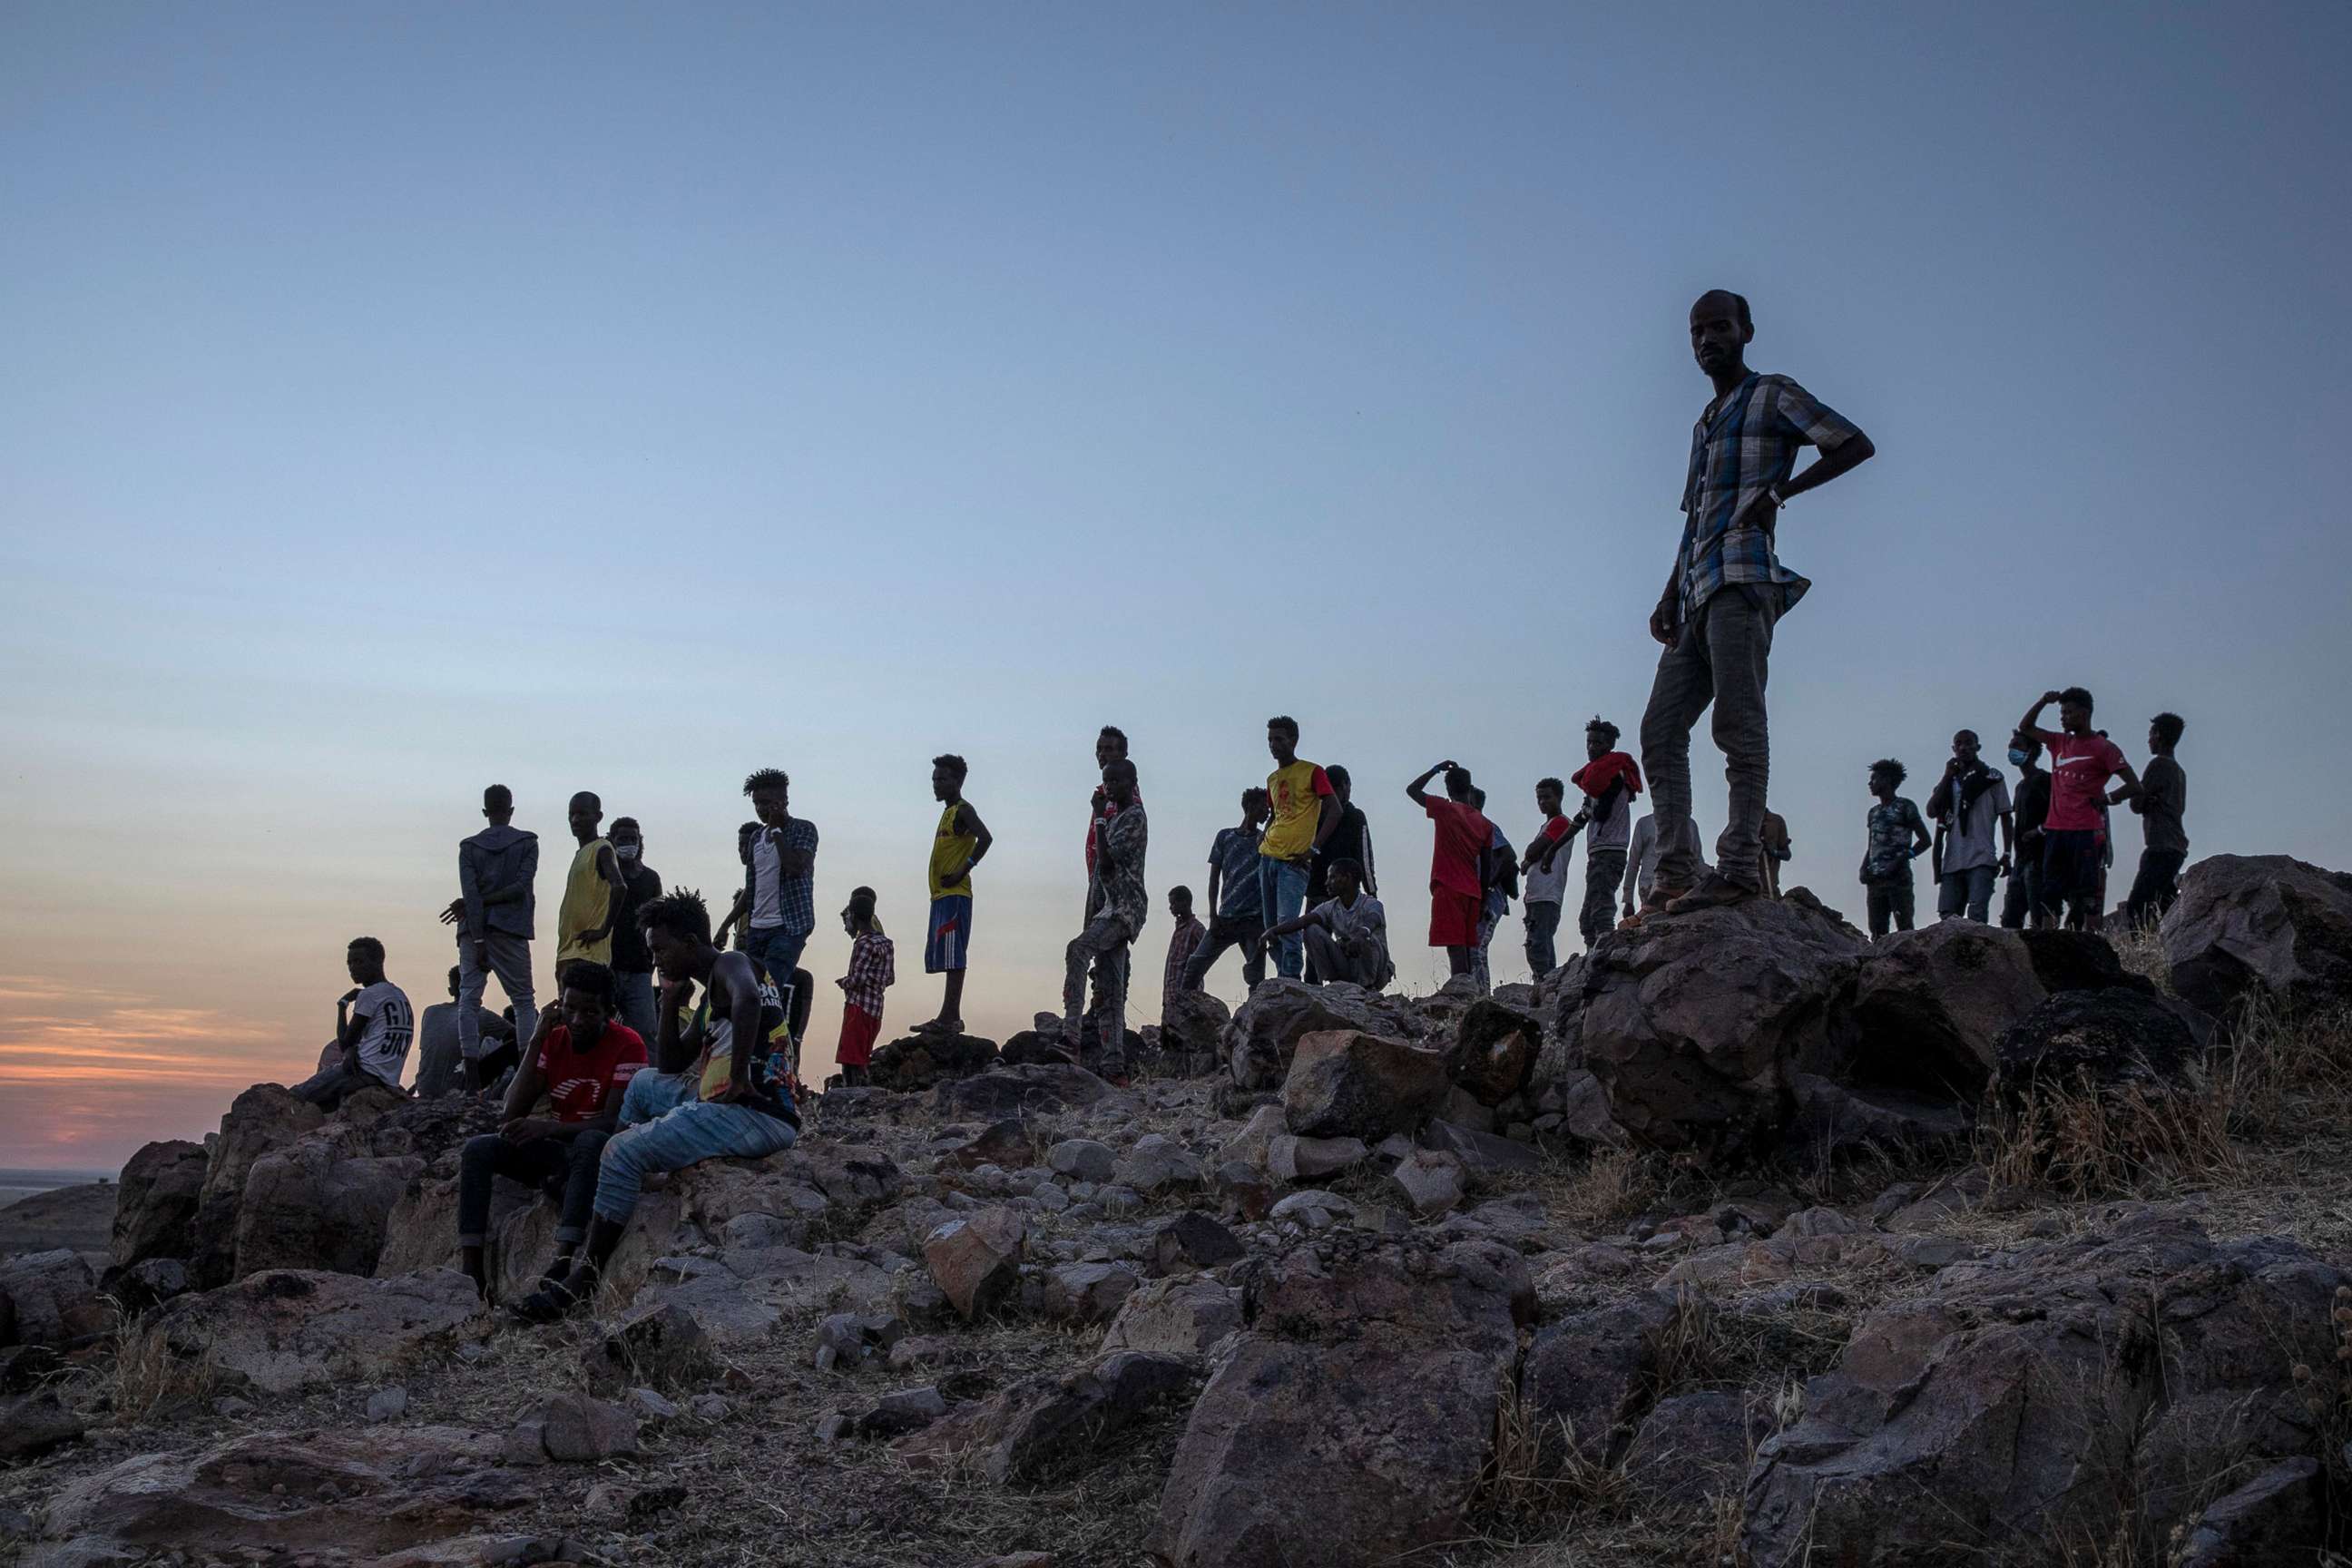 PHOTO: People who fled the conflict in Ethiopia's Tigray region, stand on a hill top over looking Umm Rakouba refugee camp in Qadarif, eastern Sudan, Nov. 26, 2020.